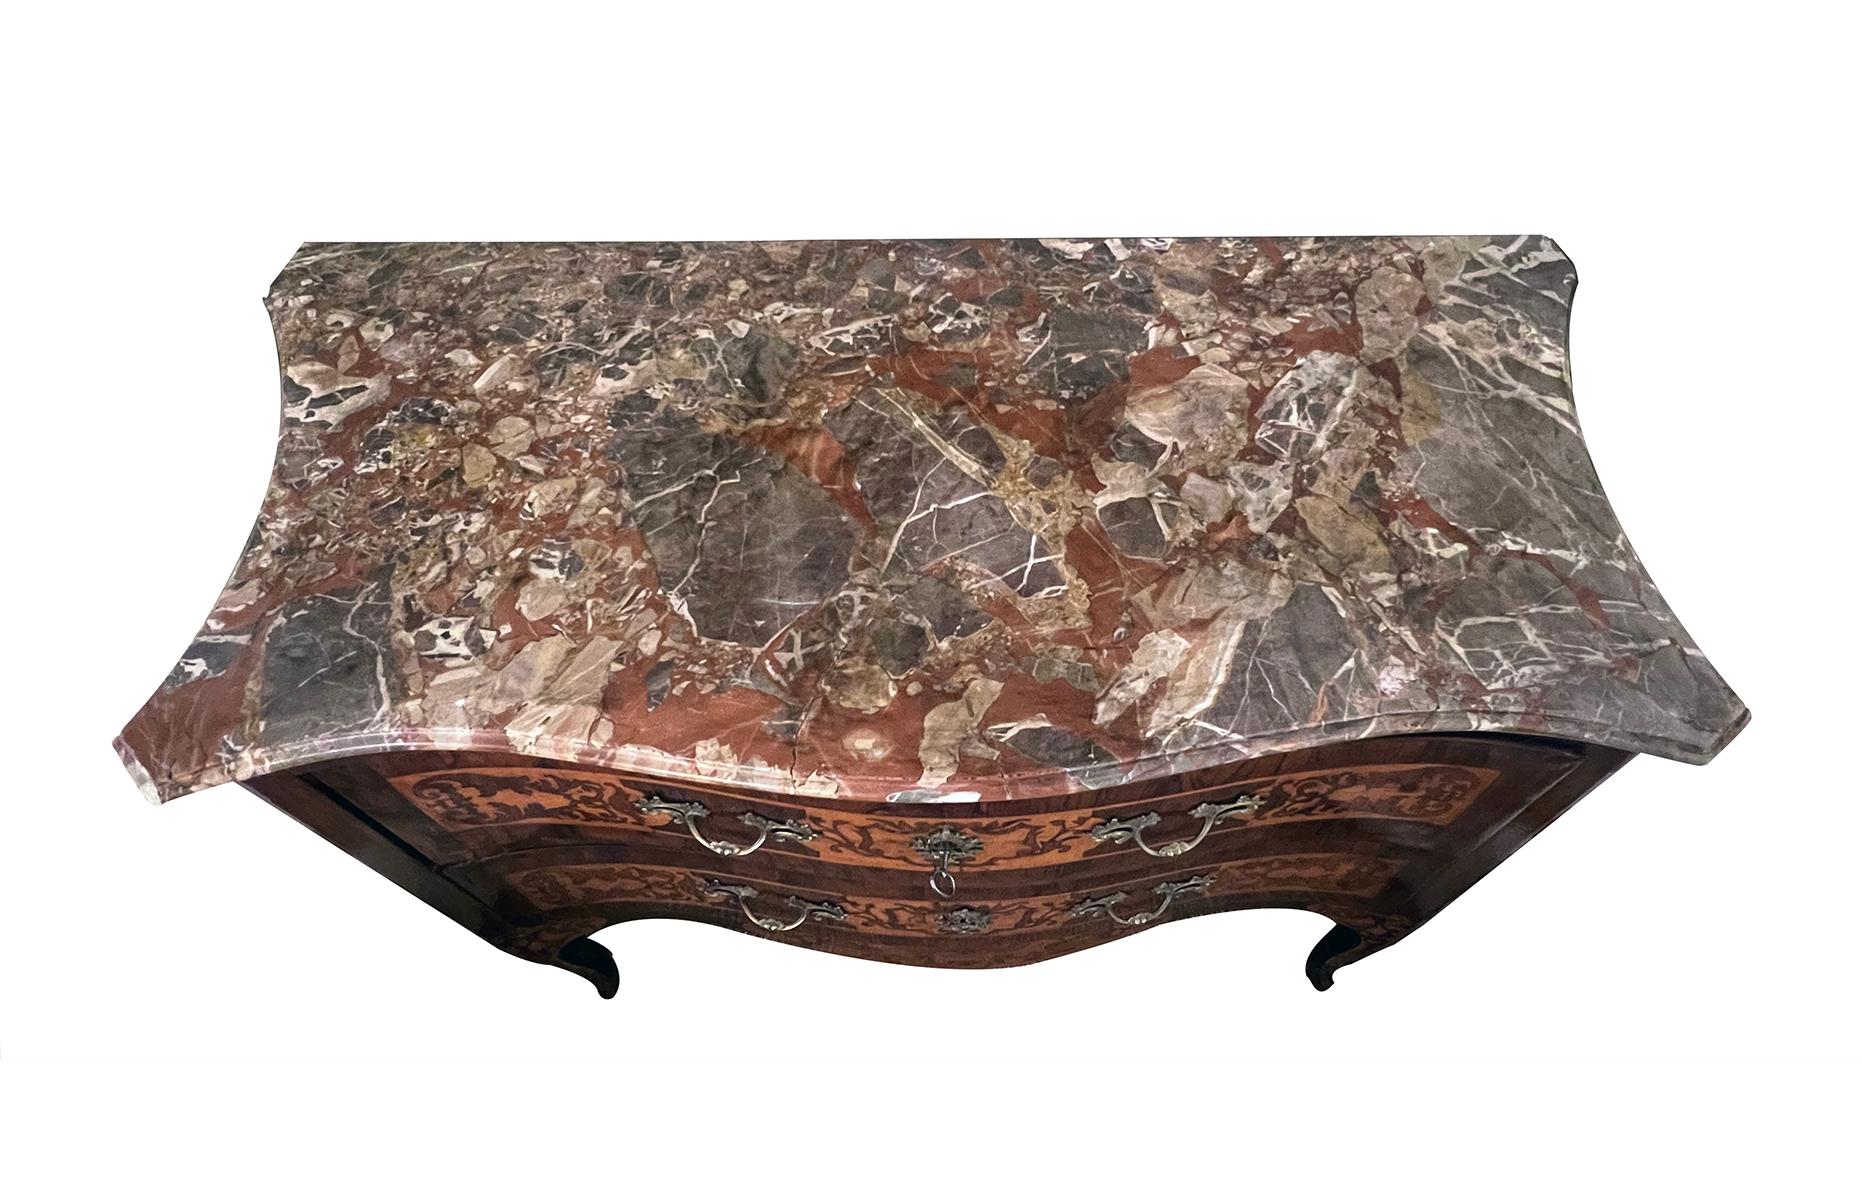 Italian Rococo Serpentine Form 2-Drawer Inlaid Chest with Marble Top For Sale 1